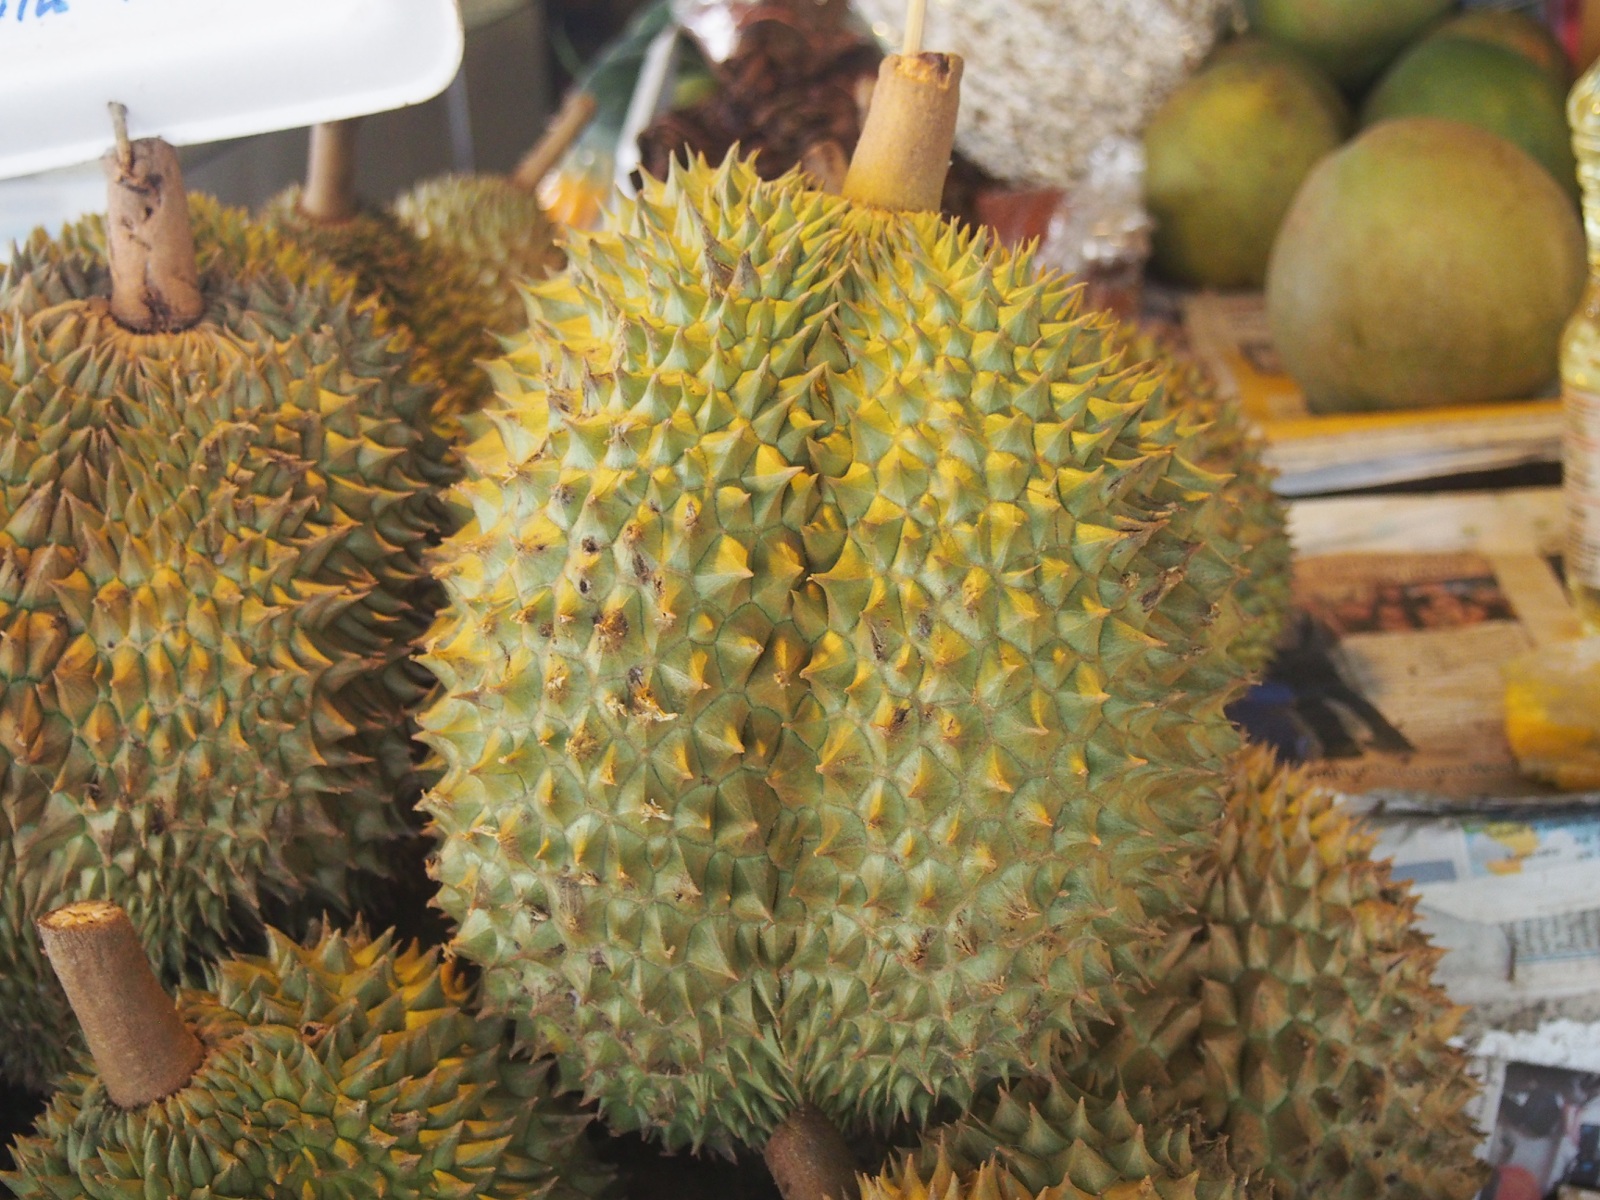 Stinky durian fruit that we were too chicken to eat 